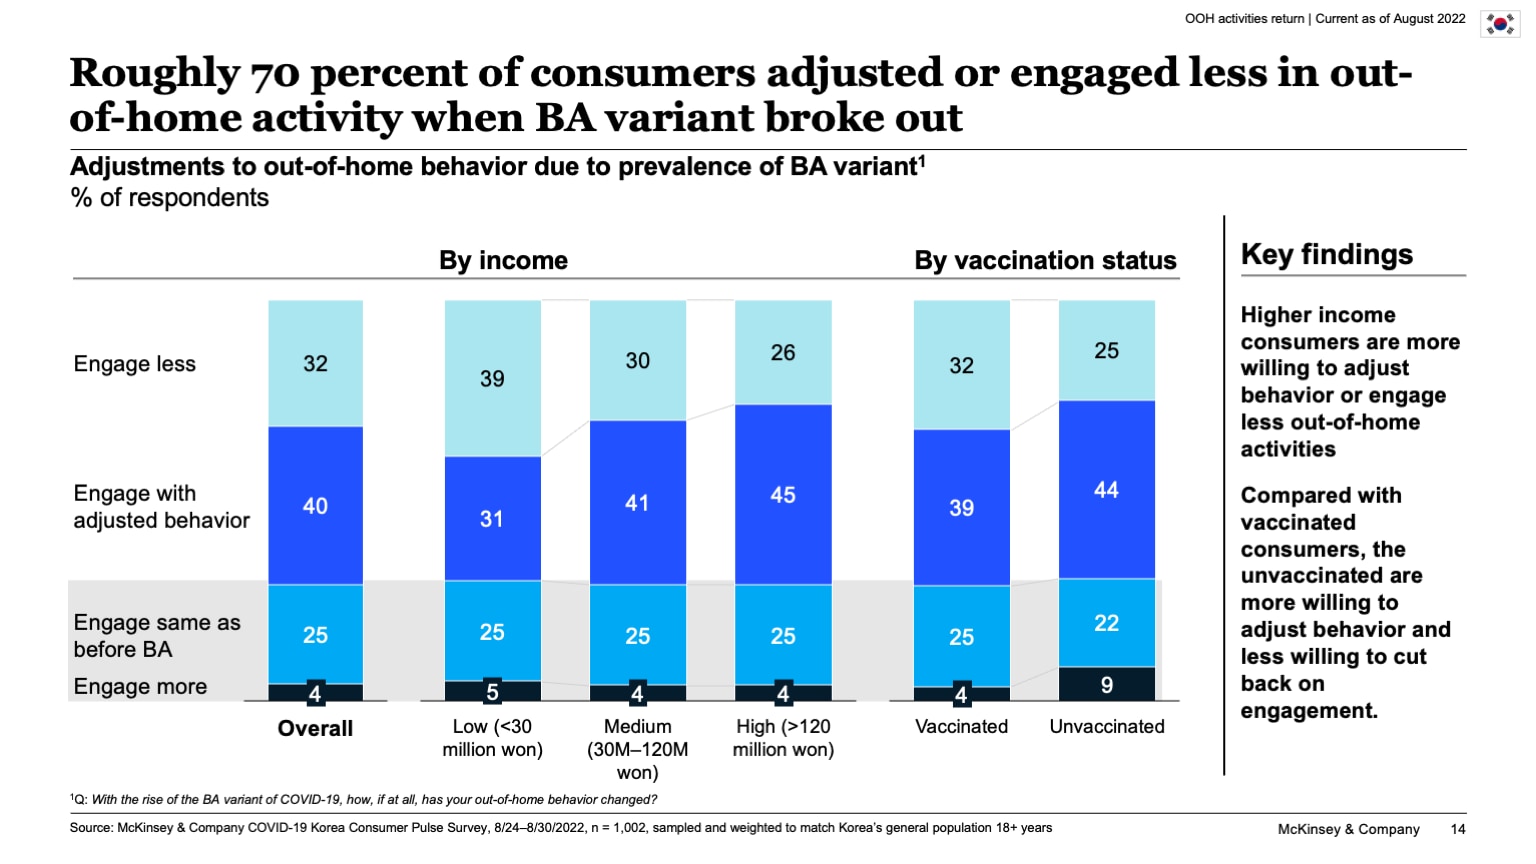 Roughly 70 percent of consumers adjusted or engaged less in out-of-home activity when BA variant broke out